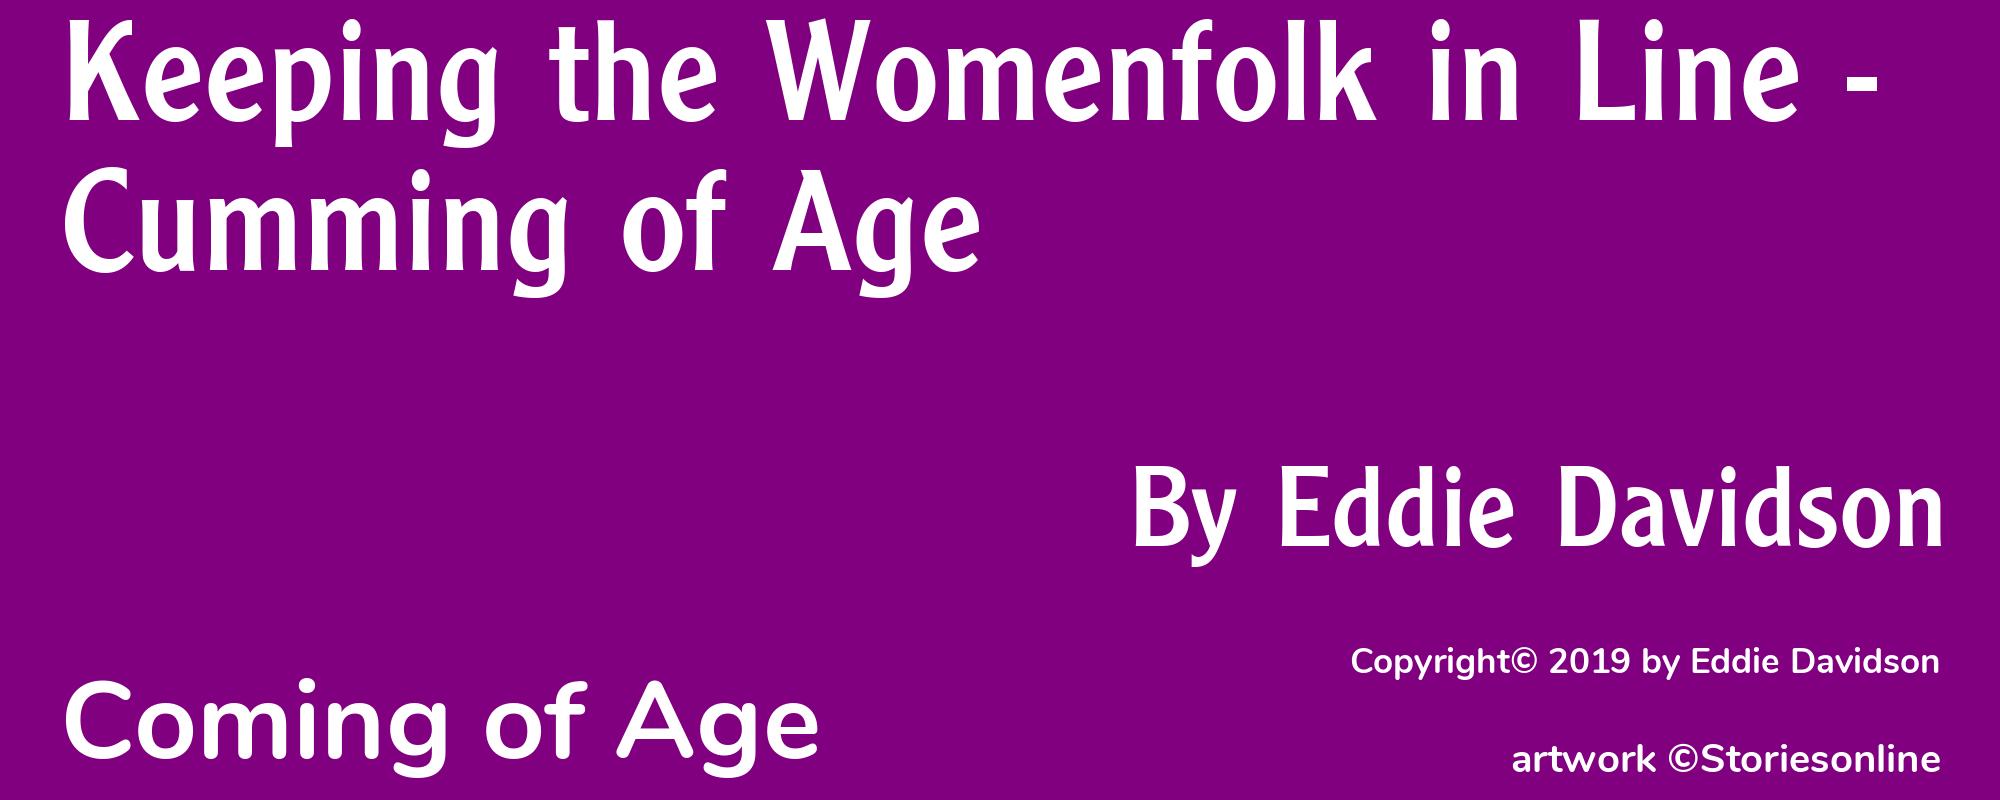 Keeping the Womenfolk in Line - Cumming of Age - Cover